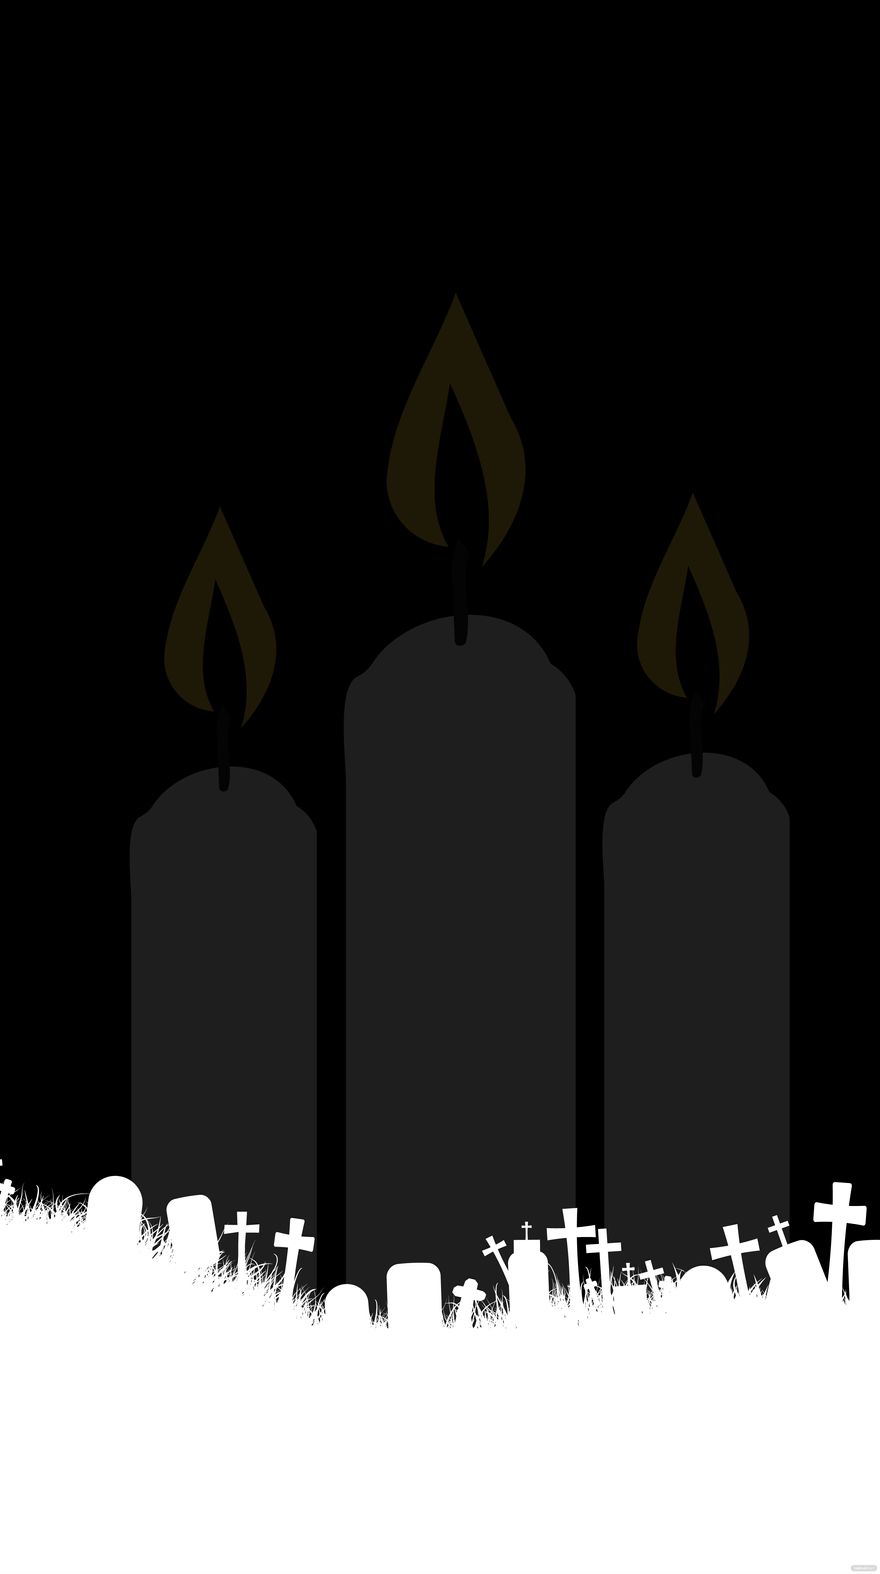 Free All Souls' Day iPhone Background in PDF, Illustrator, PSD, EPS, SVG, JPG, PNG